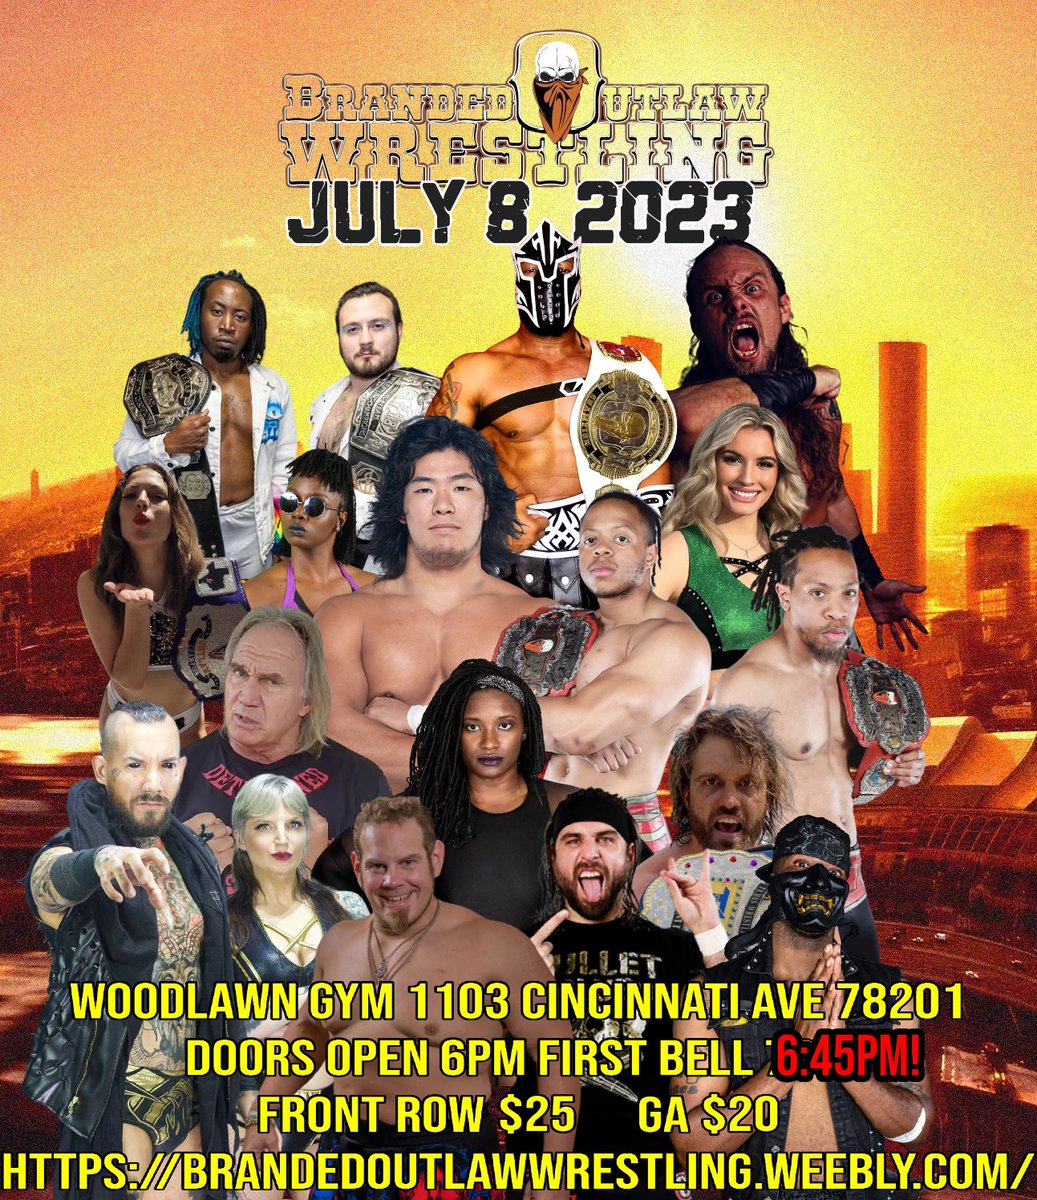 July 8 Chase Owens, Barrett Brown, Yuya Uemura, FlyDef, City Bois, Savage King, Boss Baines, Reiza Clarke, Mark Von Erich, Mystii Marks, LadyBird Monroe, and many more! Tickets available at: brandedoutlawwrestling.weebly.com #prowrestling #brandedoutlawwrestling #indywrestling